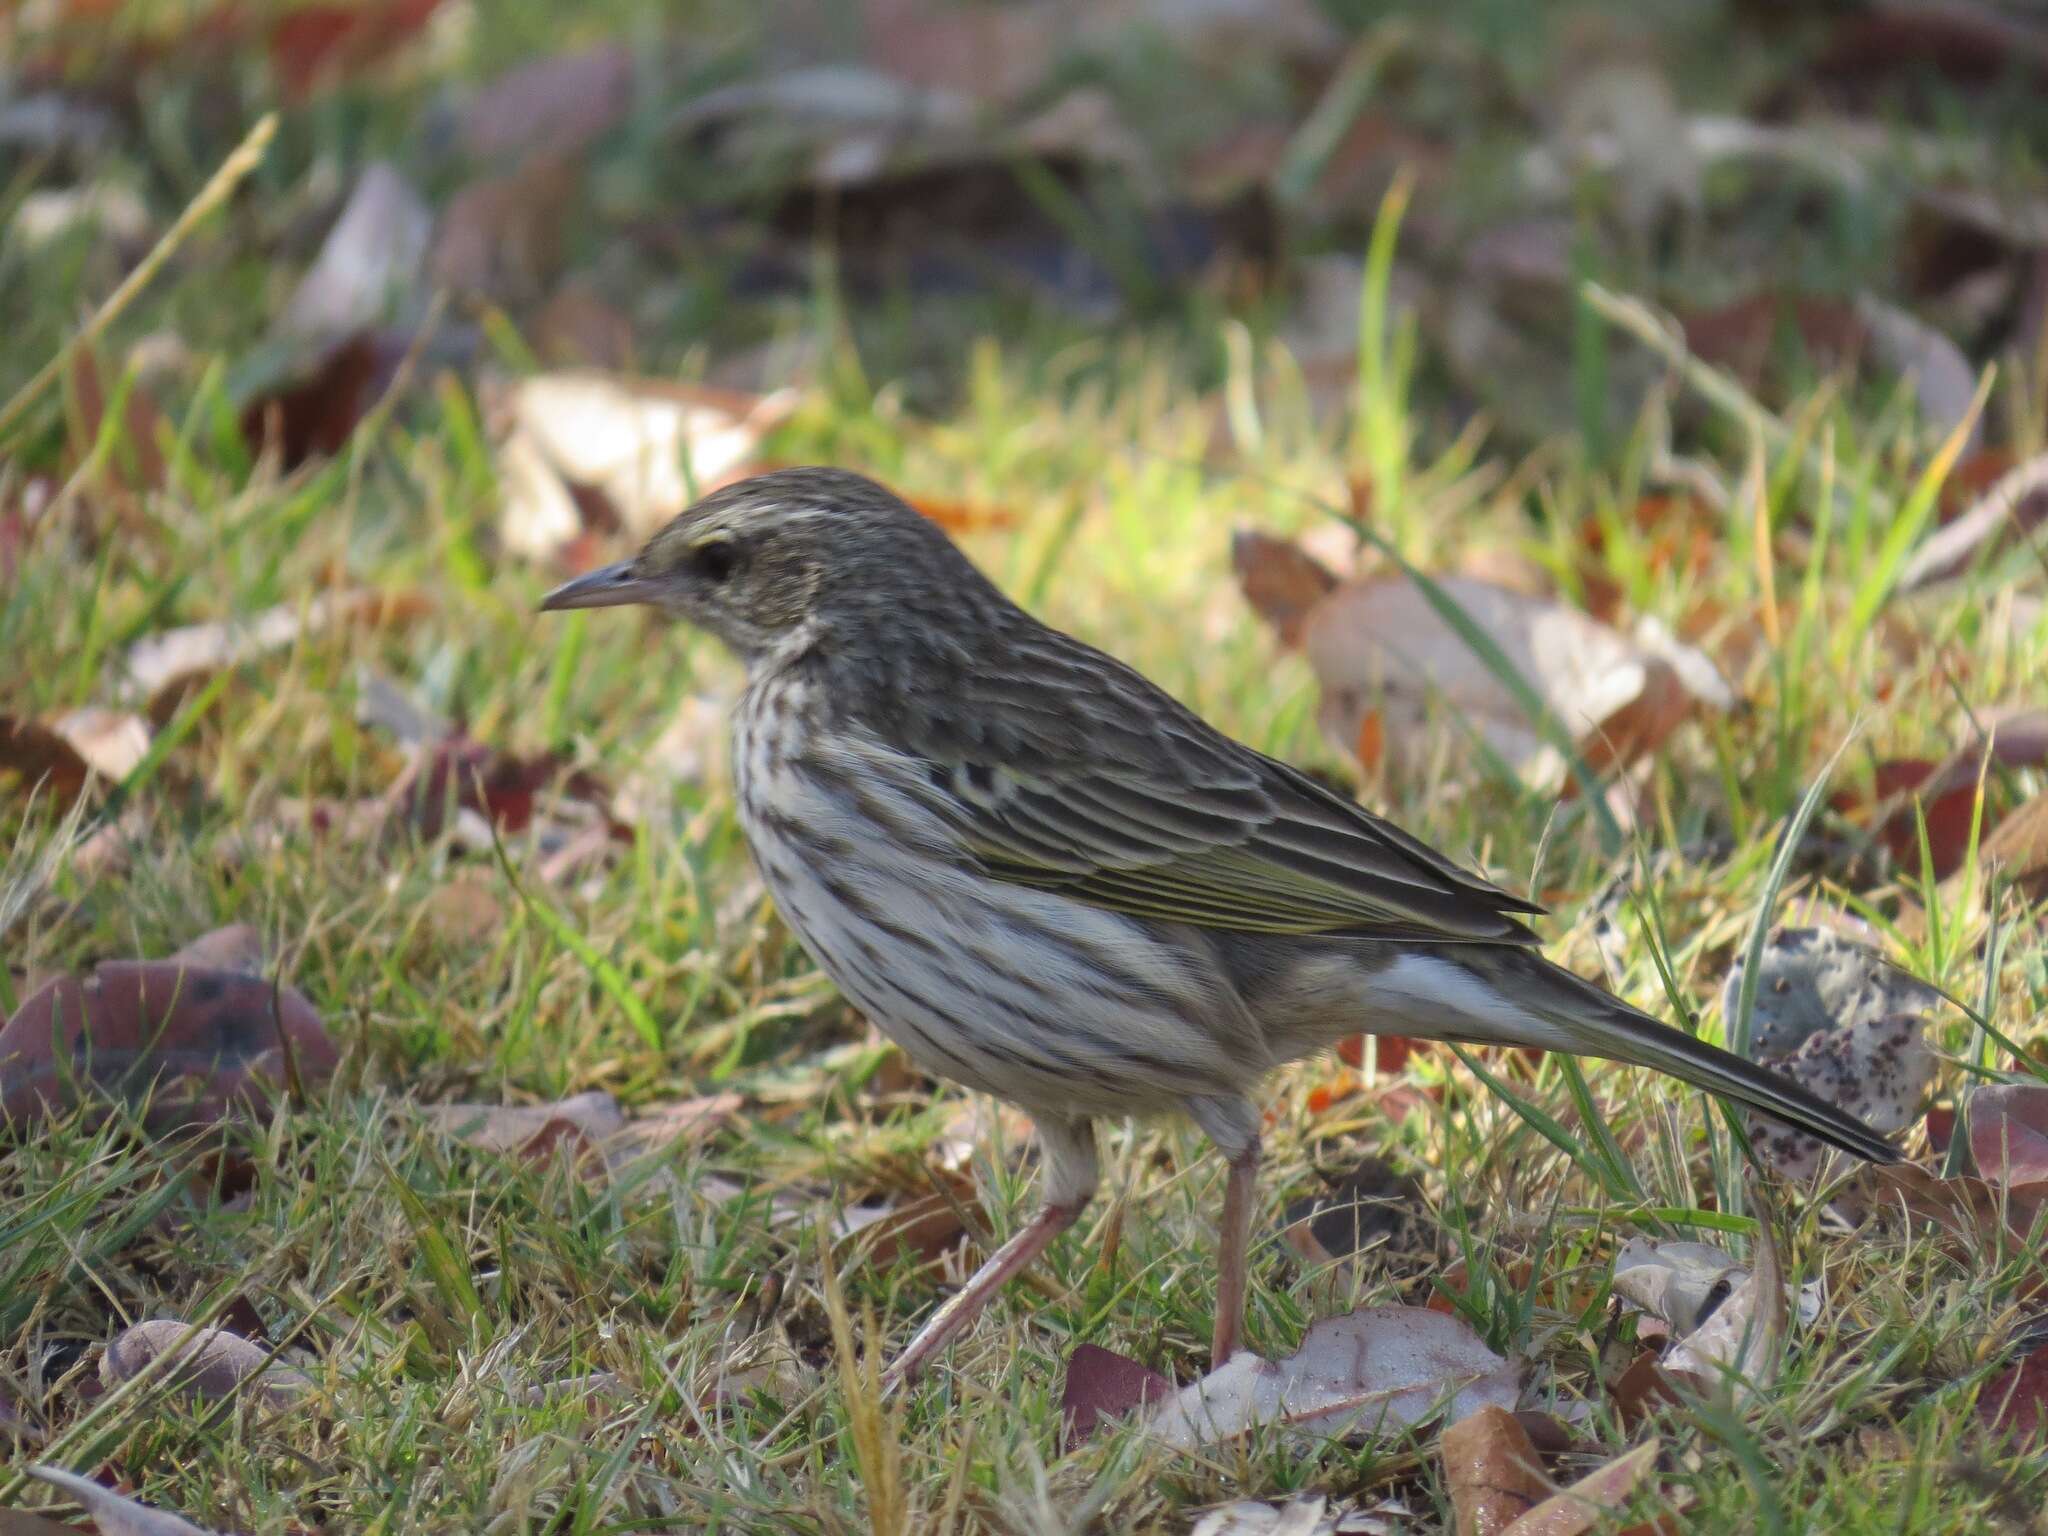 Image of Striped Pipit